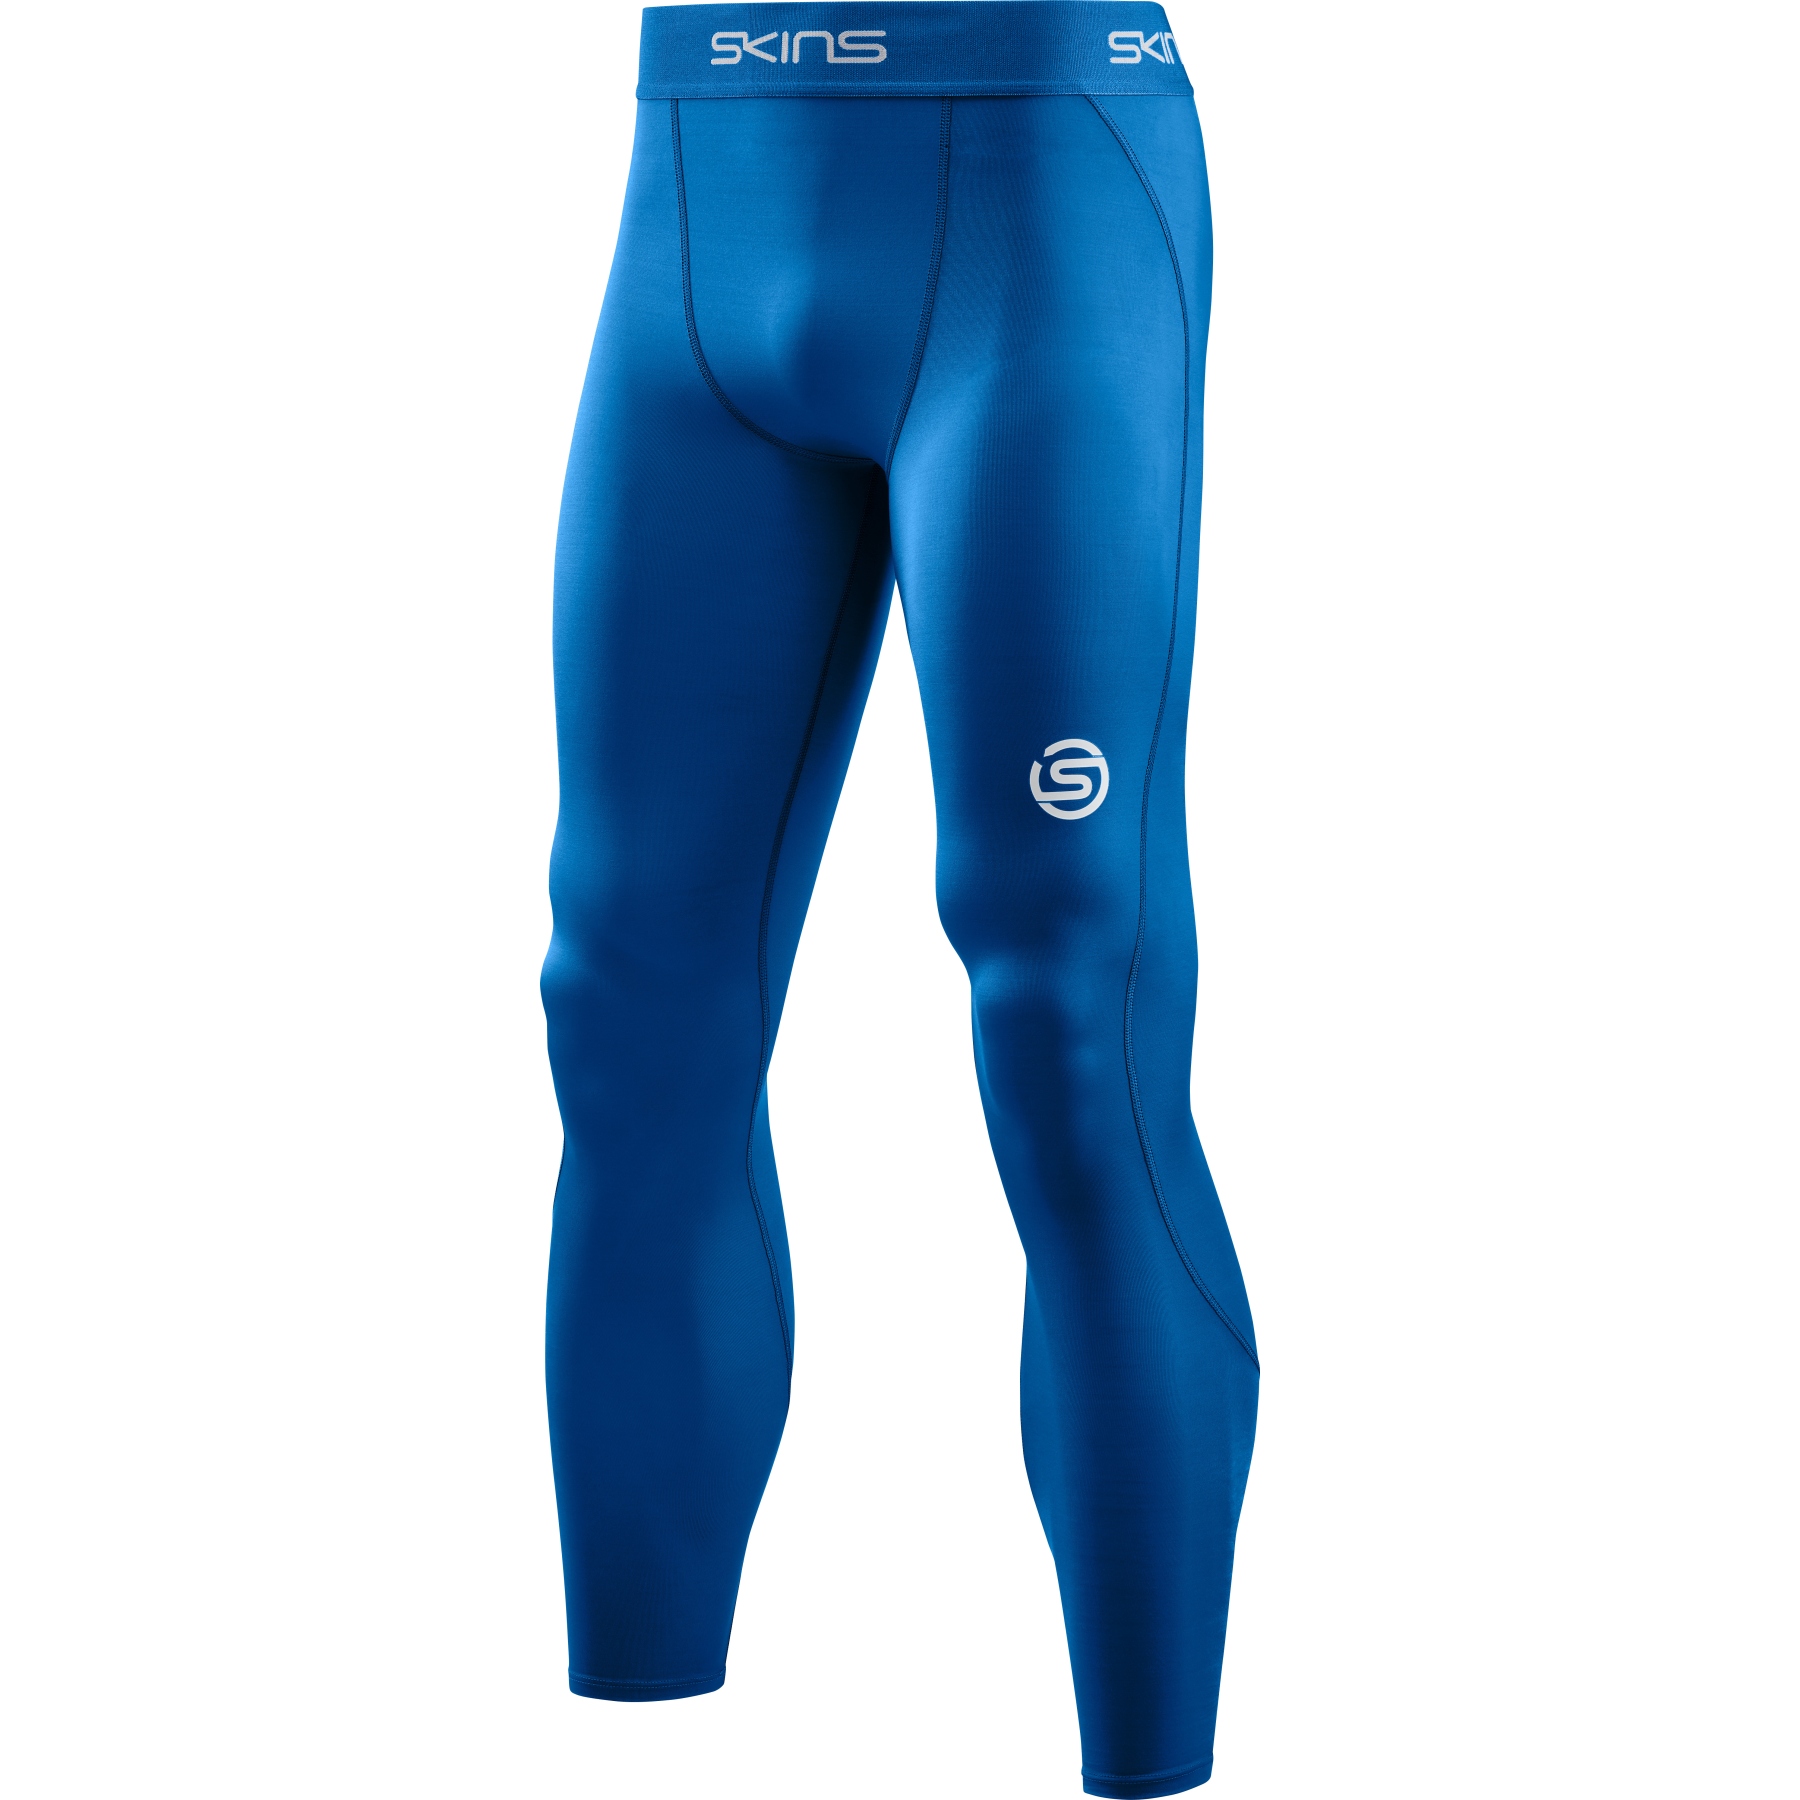 TRAIL RUNNING CLOTHING & SHOES Skins DNAMIC THERMAL - Tights - Men's - navy  blue/bright blue - Private Sport Shop